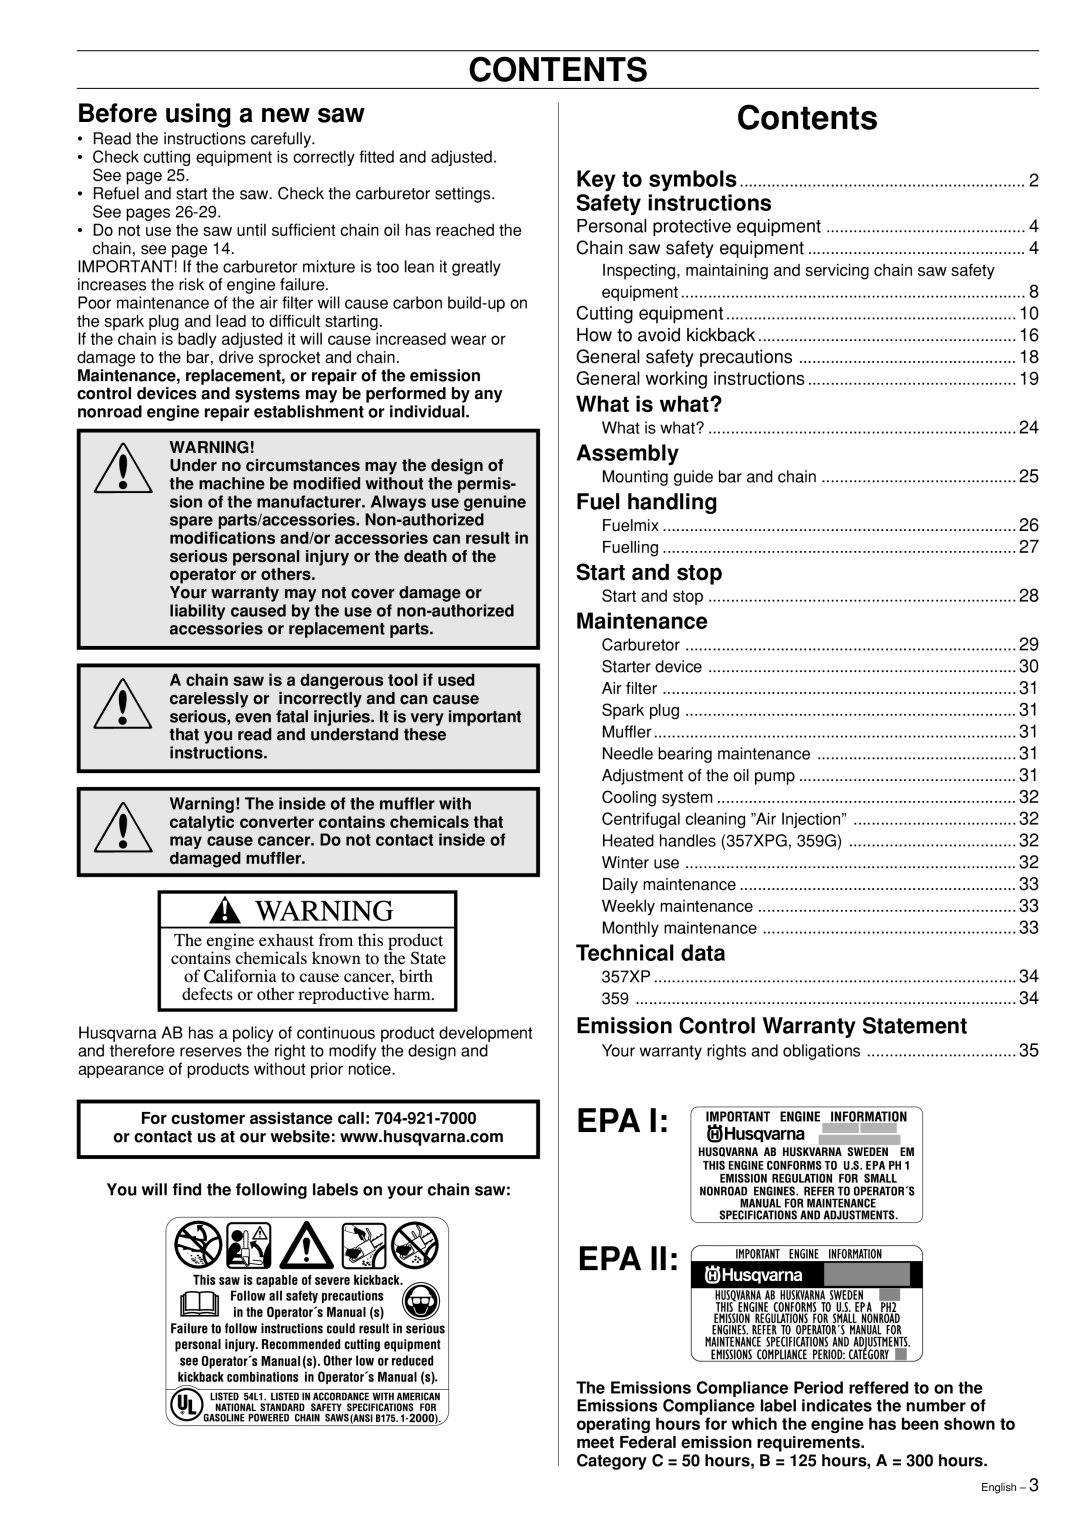 Husqvarna 359 manual Contents, Epa Epa, Before using a new saw, Safety instructions, What is what?, Assembly, Fuel handling 